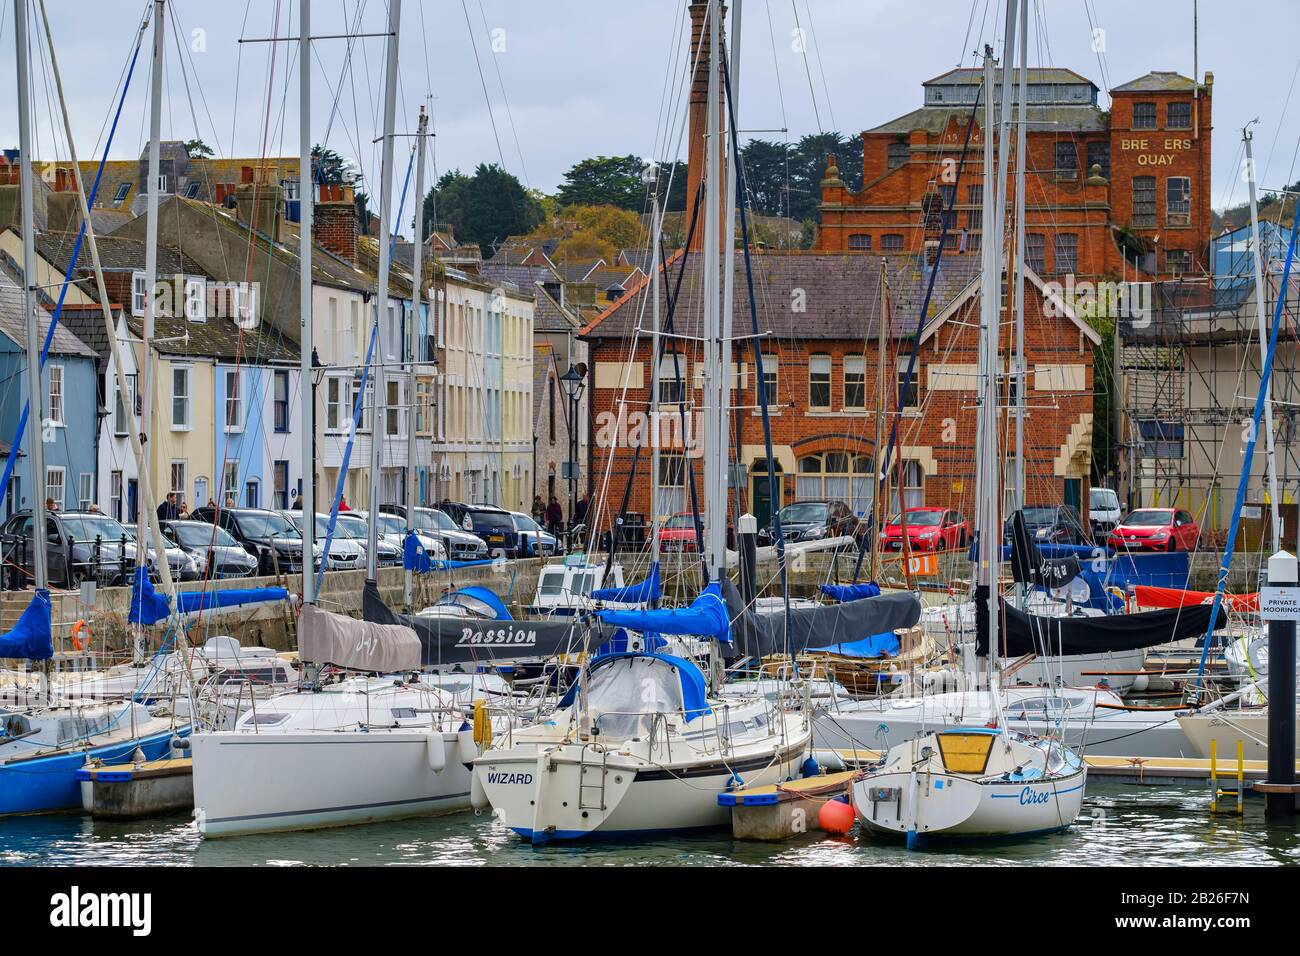 Moored yachts and boats in Weymouth Harbour with colourful houses on the Jurassic Coastline of Dorset, South West, UK Stock Photo